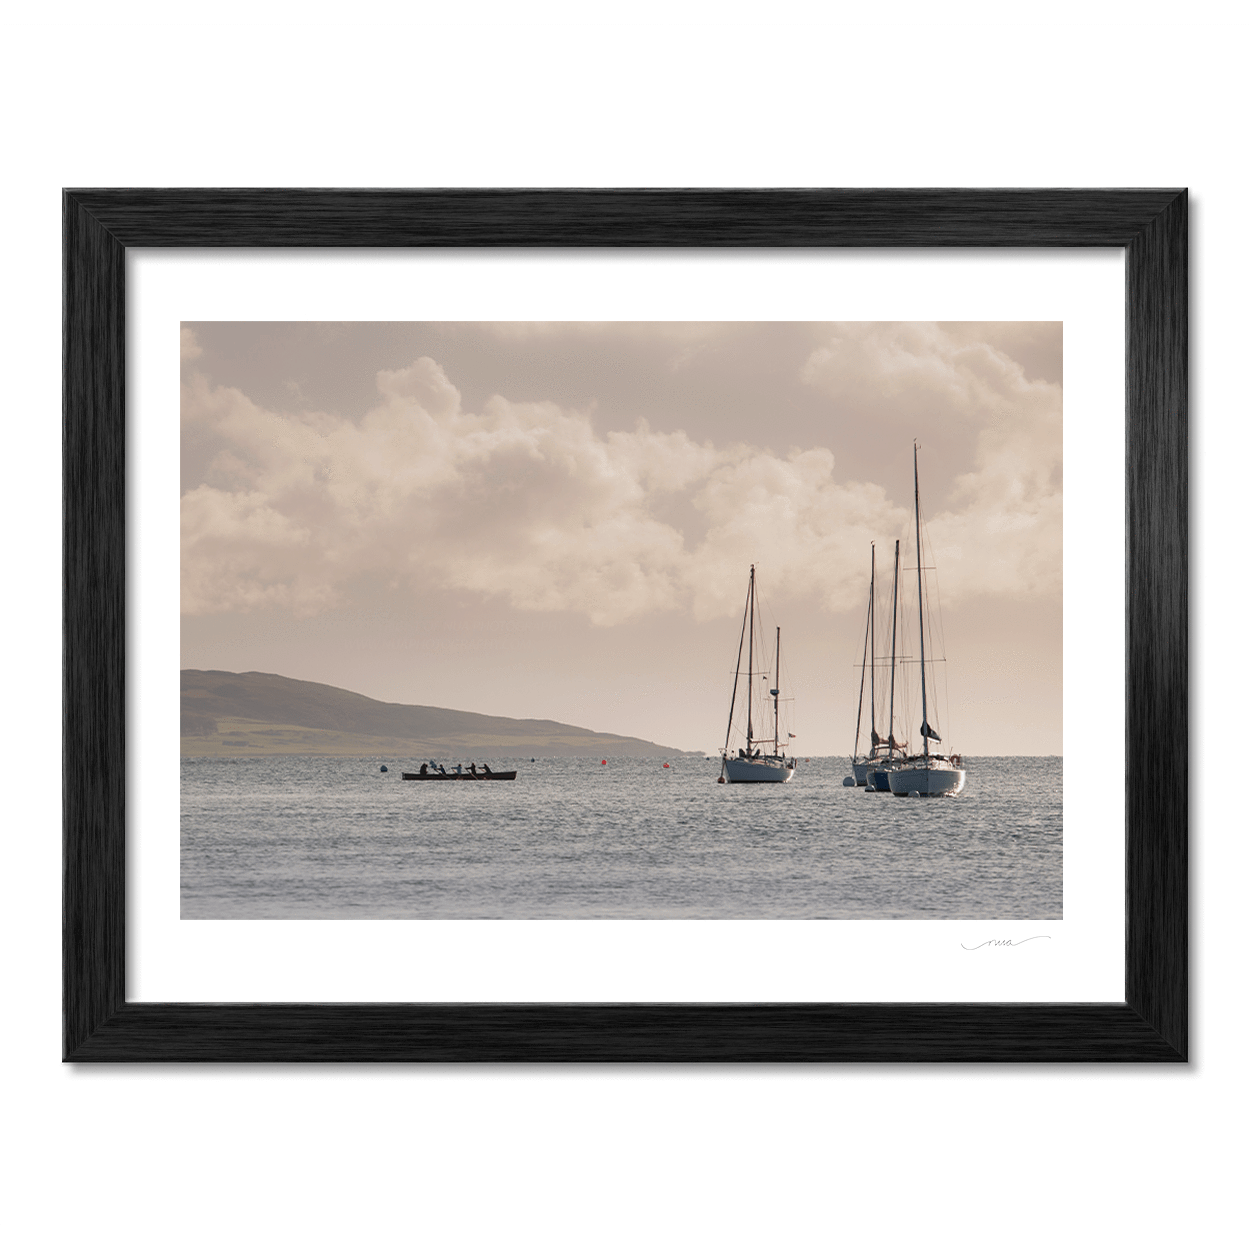 Nua Photography Print Fingal Rowers Training Rogerstown